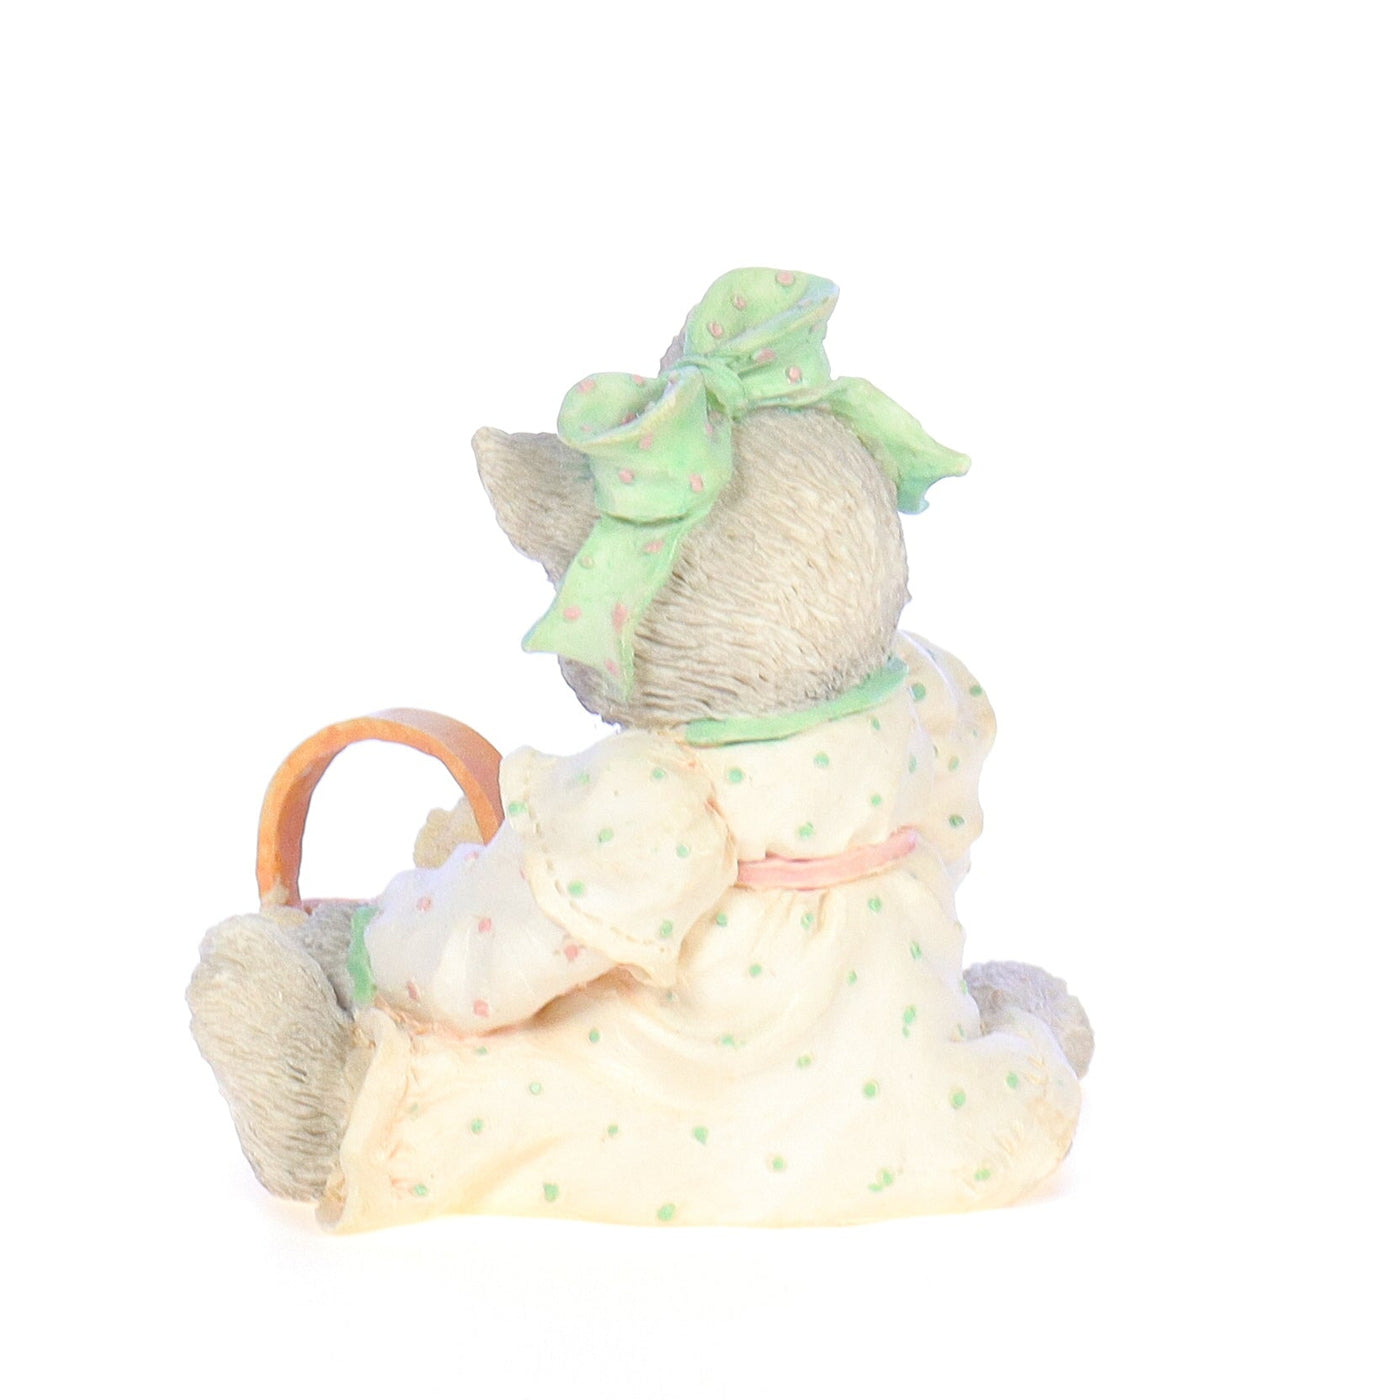 Calico_Kittens_Youre_A_Friend_Fur-Ever_Easter_Figurine_1992